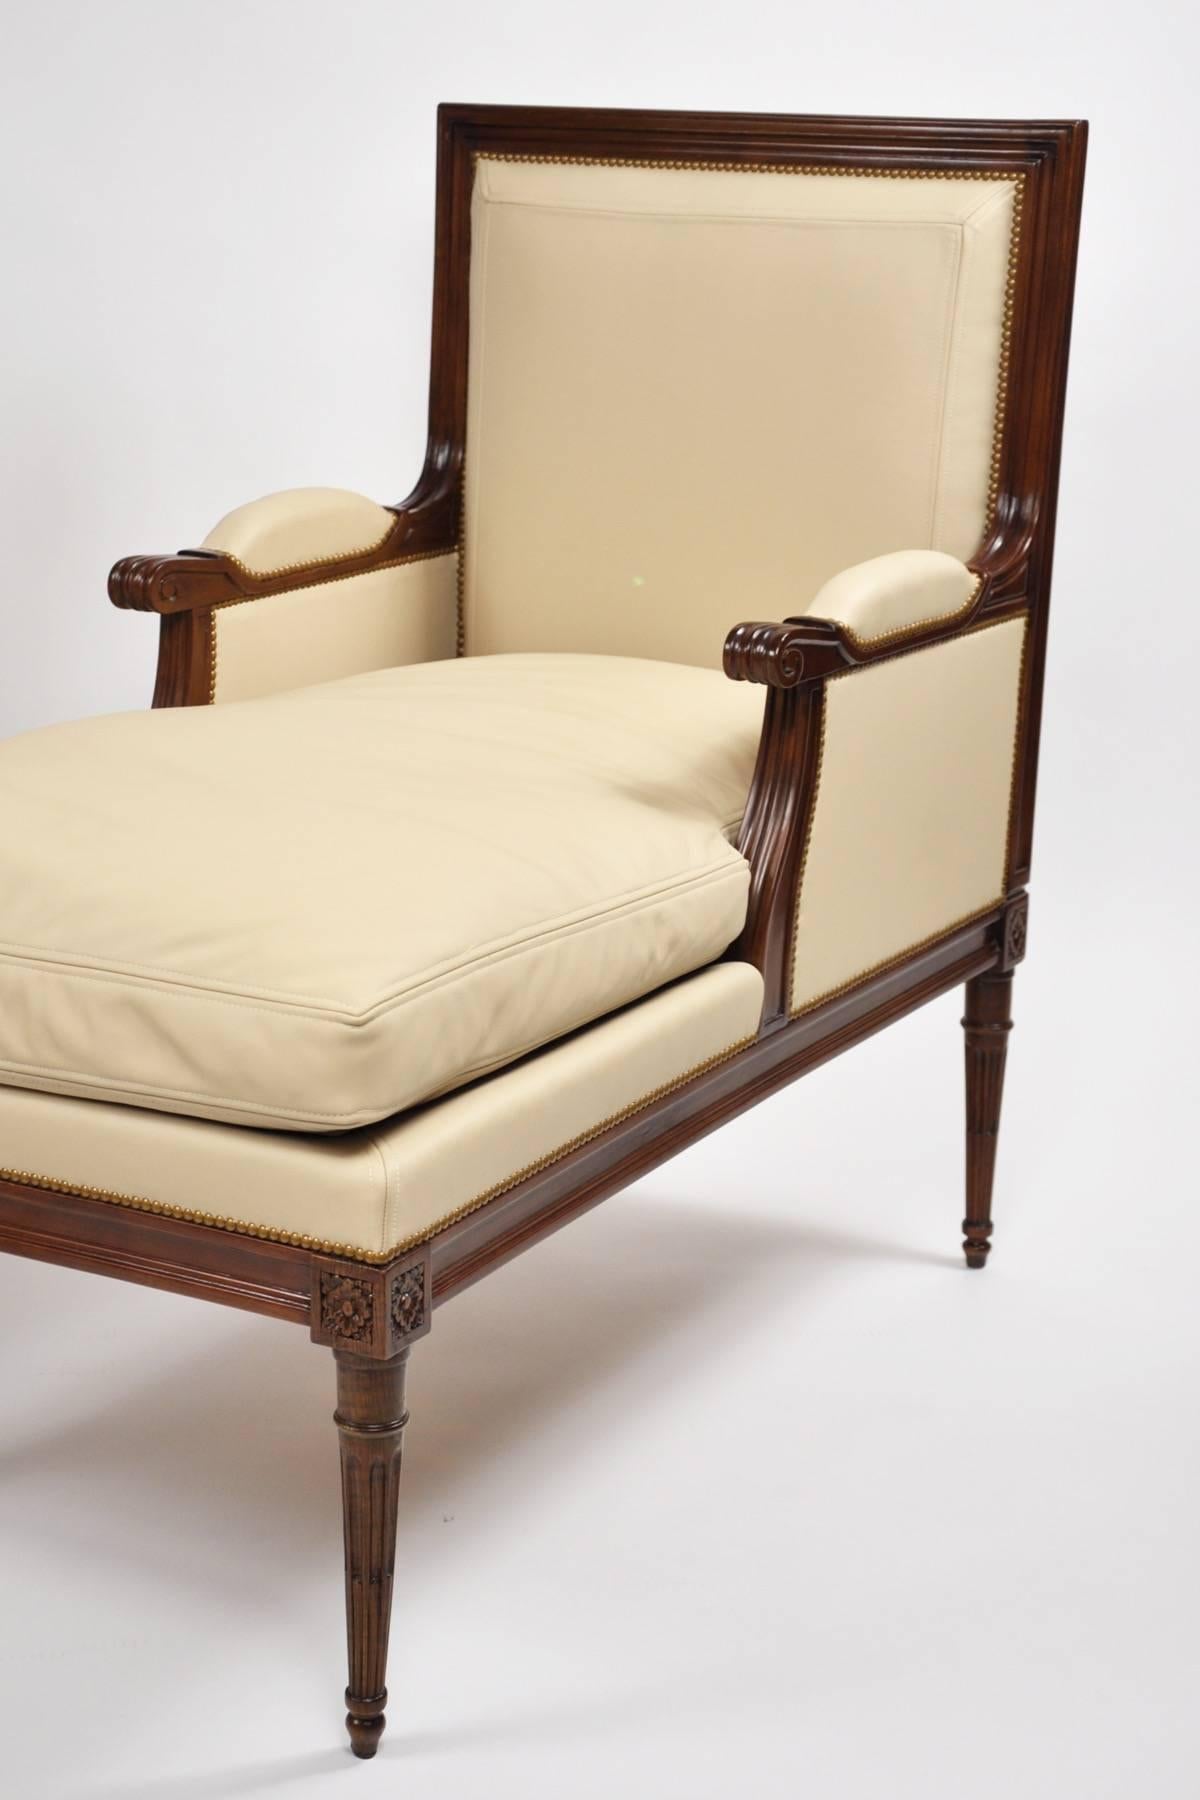 Carved beech armchairs with elongated seats in the style of a Louis XVI “Duchesse”; handsomely carved with rosettes and scrolls; upholstered in leather, with padded rests and a long cushion seat. Arm height 25-3/4”.

OUR REFERENCE N5575
 